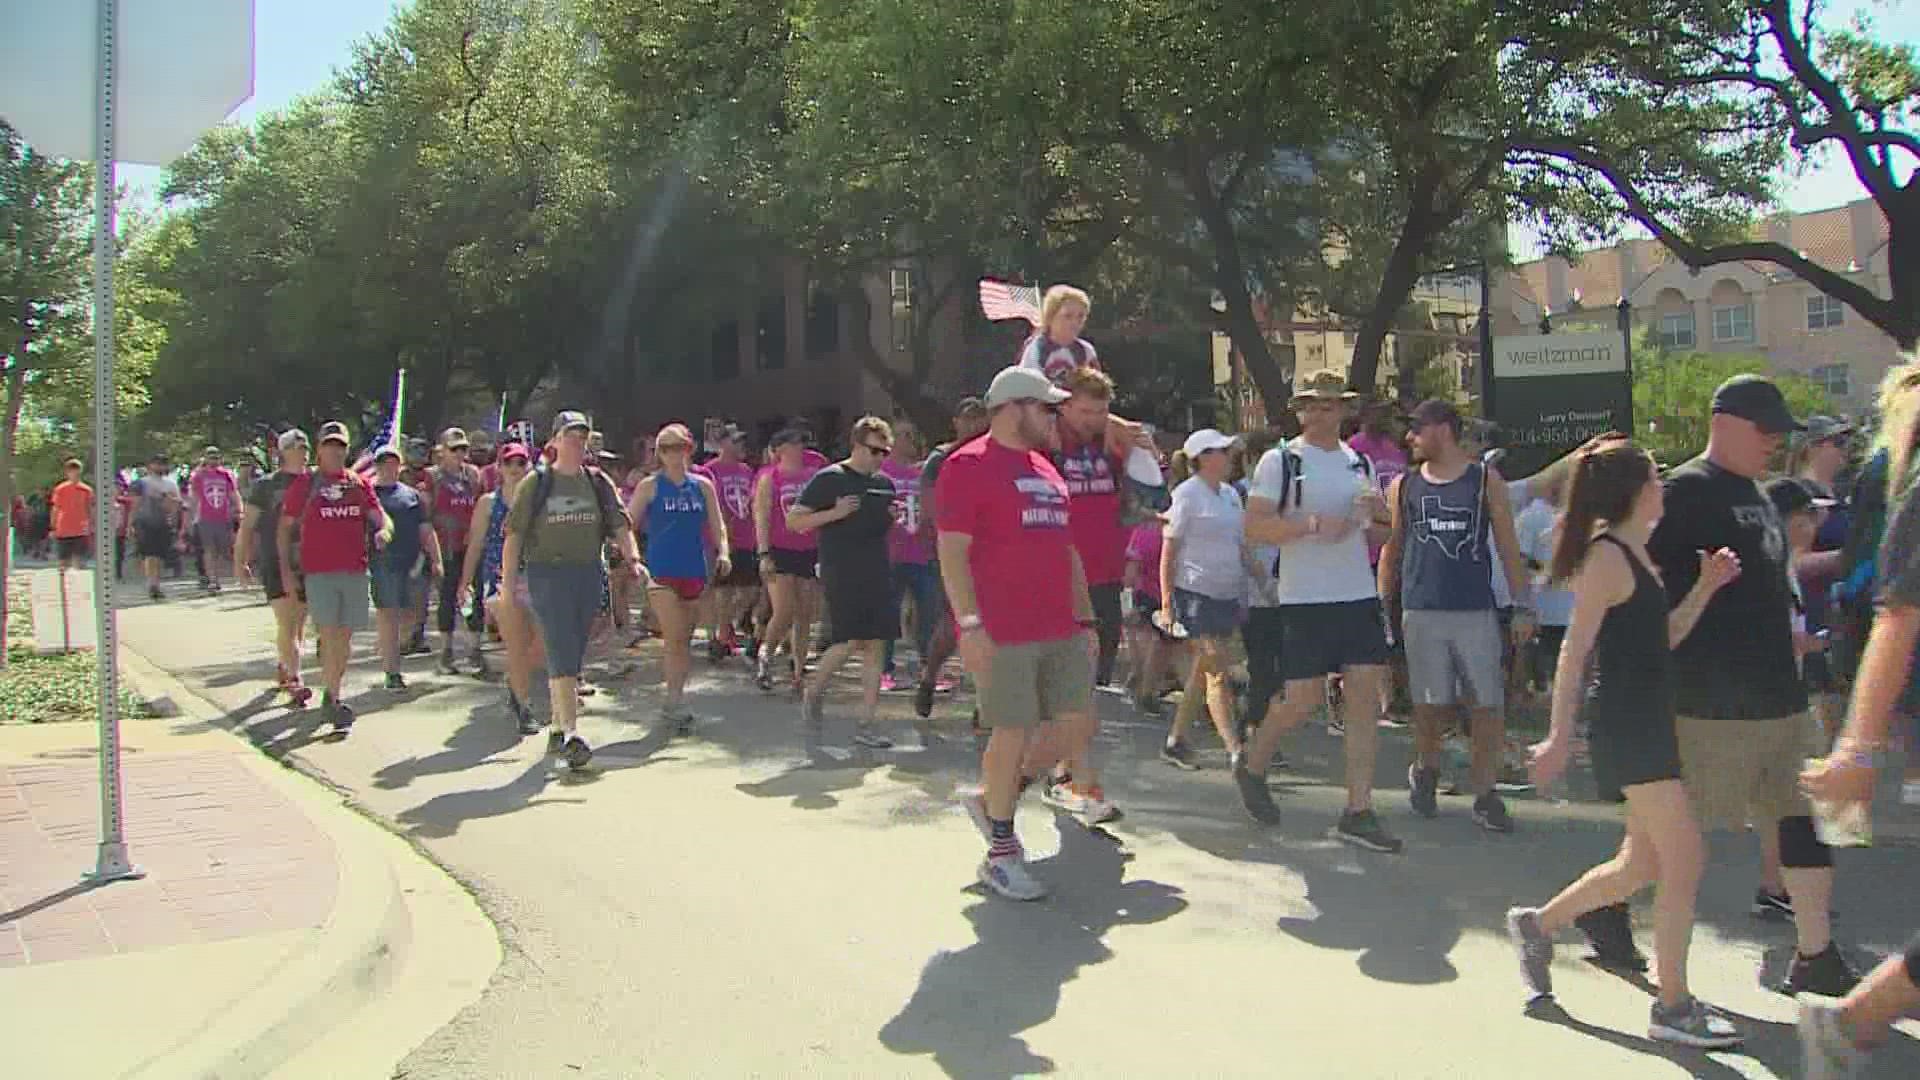 Around 10,000 people are walking for 20 hours in honor of veterans.